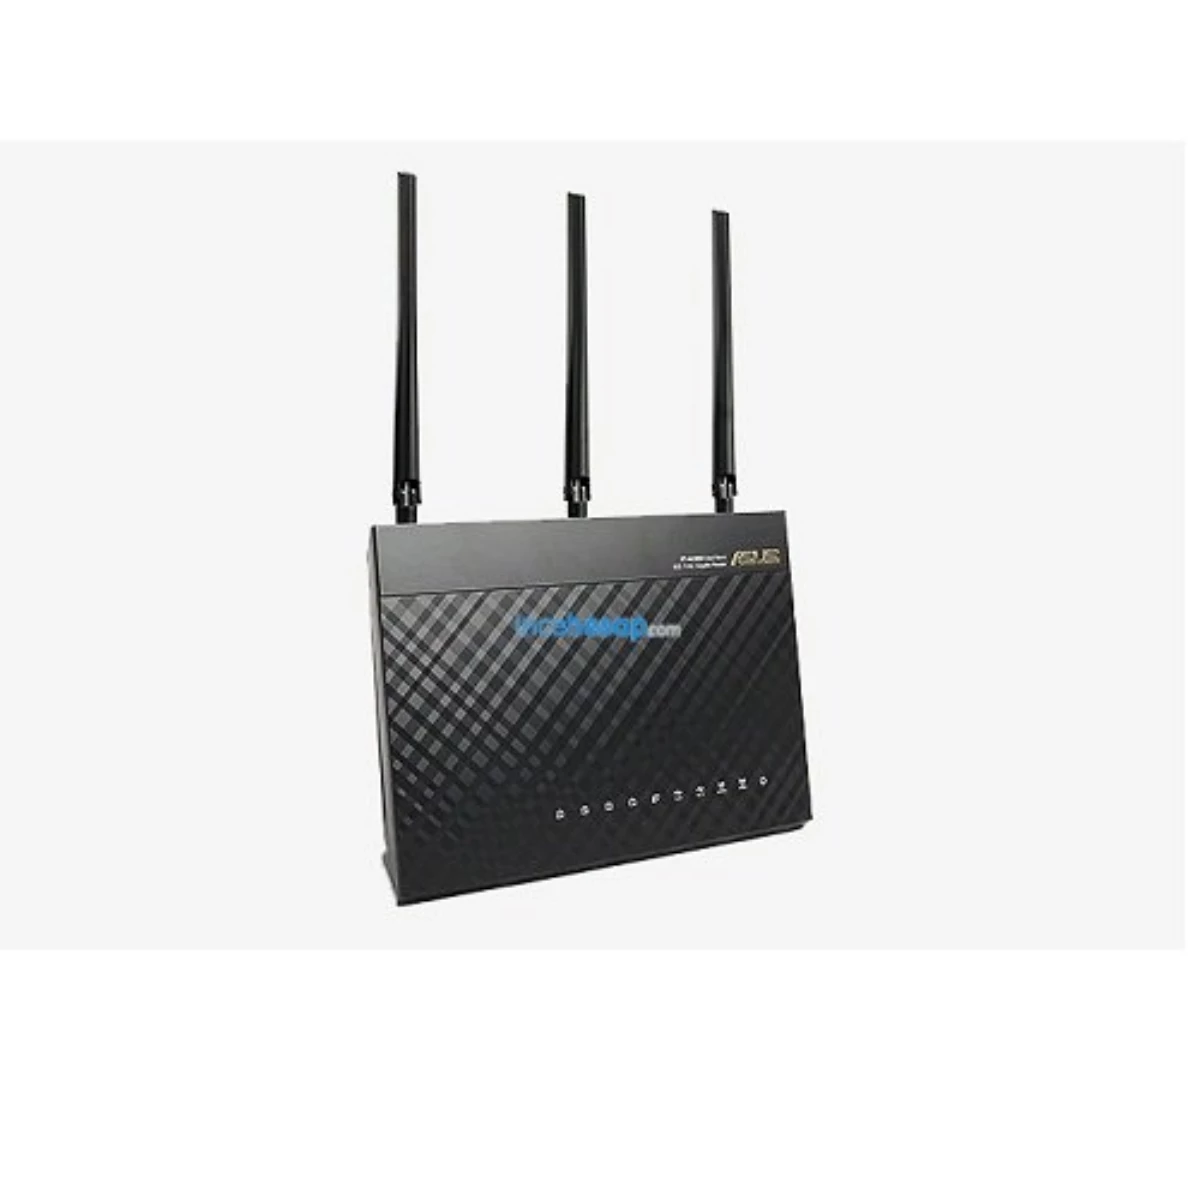 Asus Rt-Ac68u 600-1300mbps Dual Router